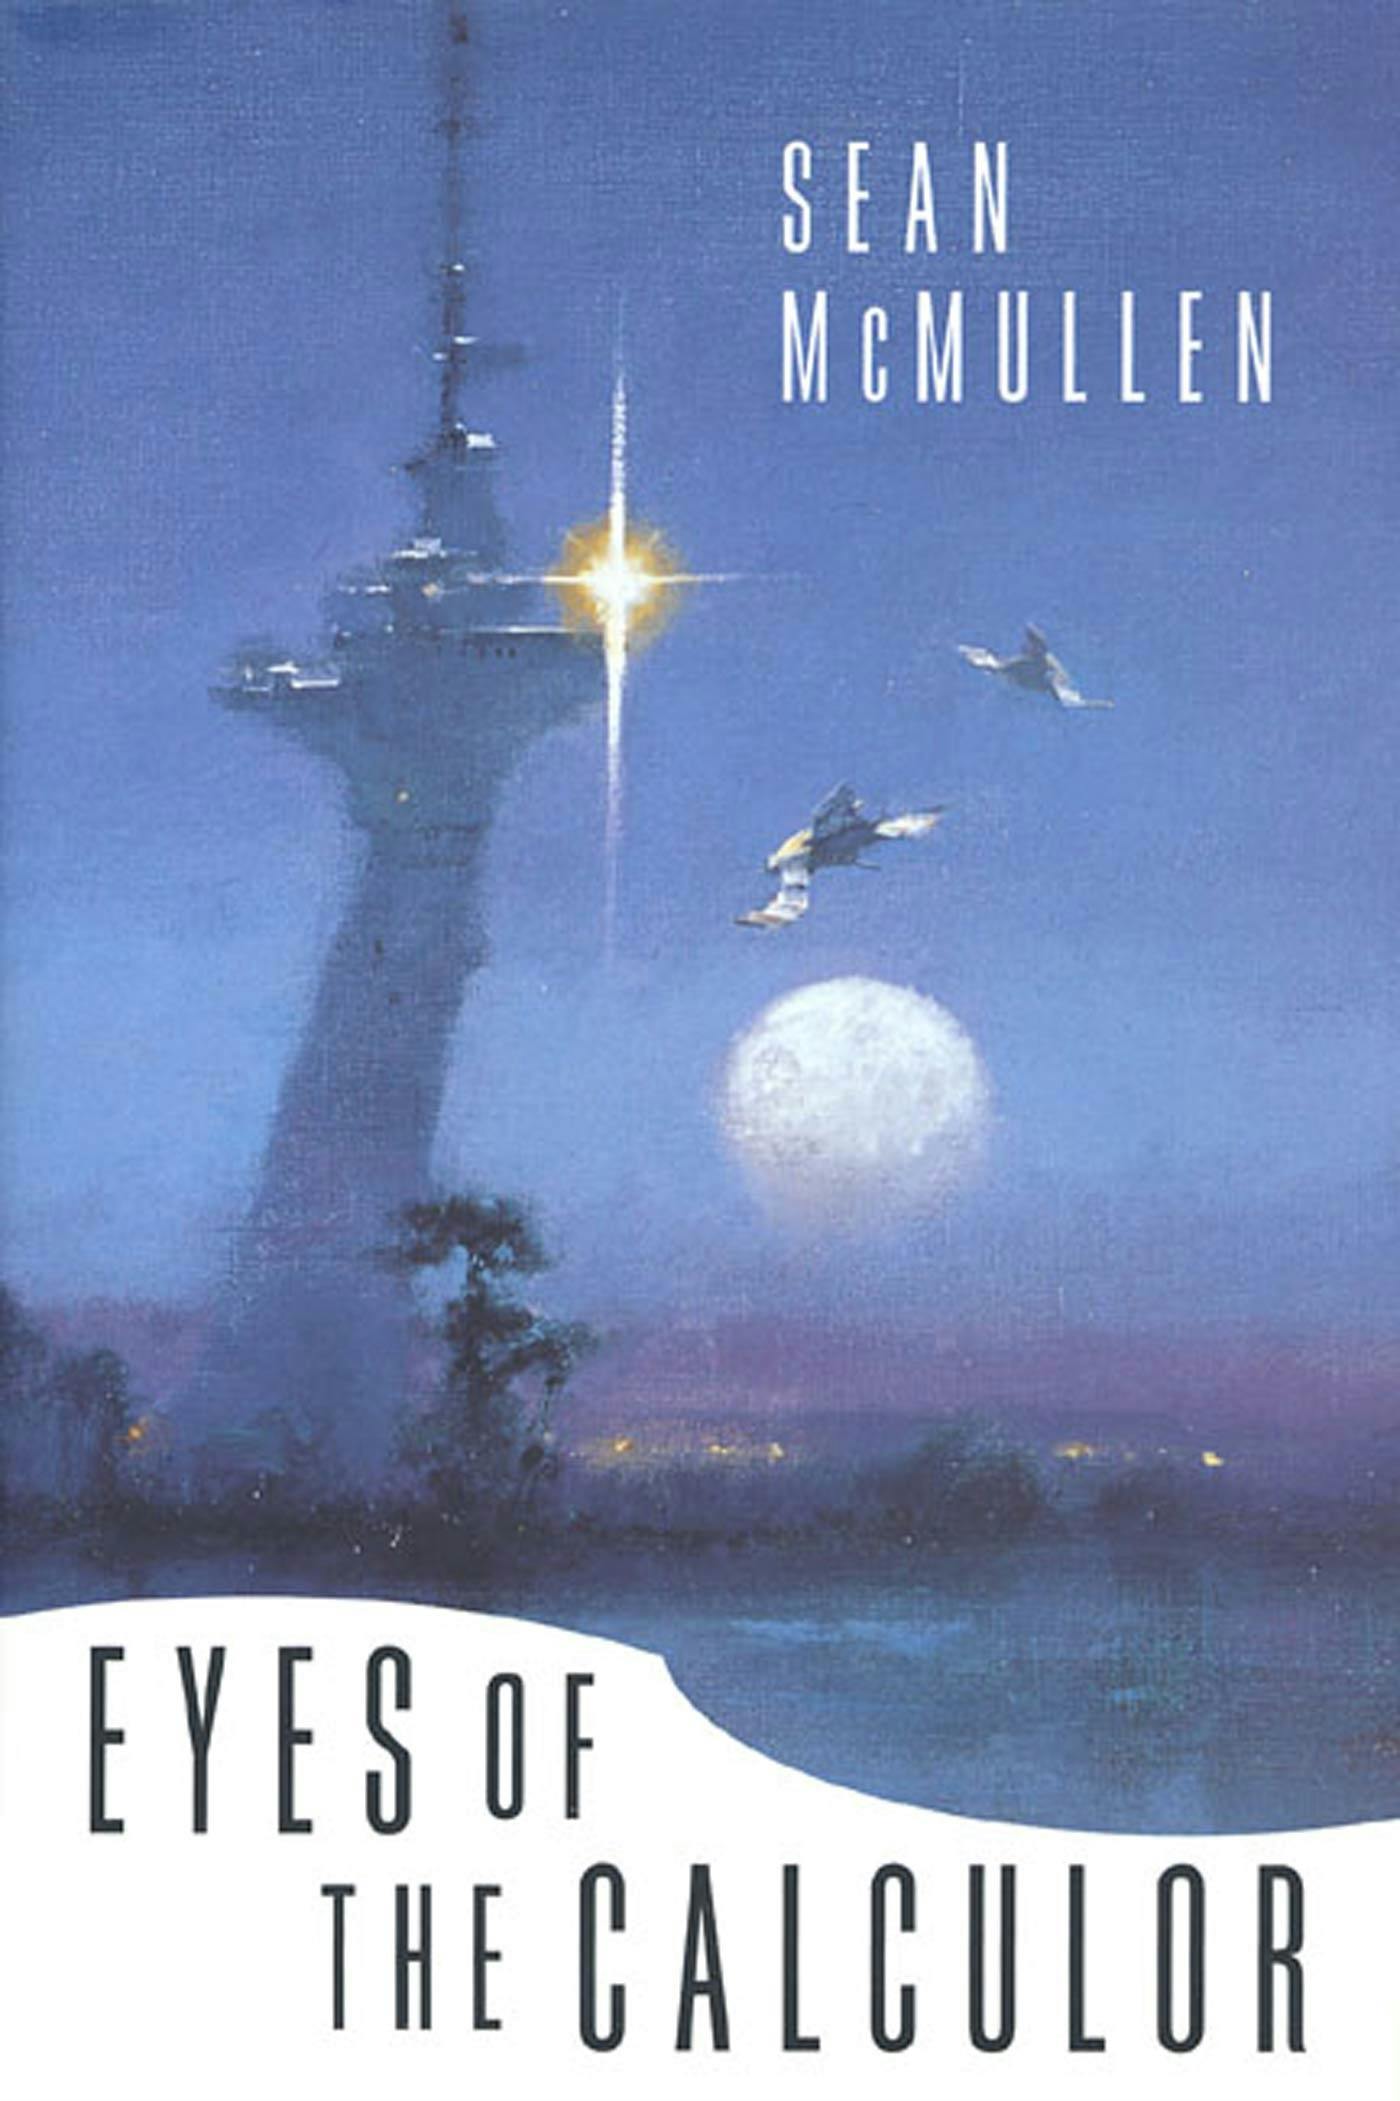 Cover for the book titled as: Eyes of the Calculor